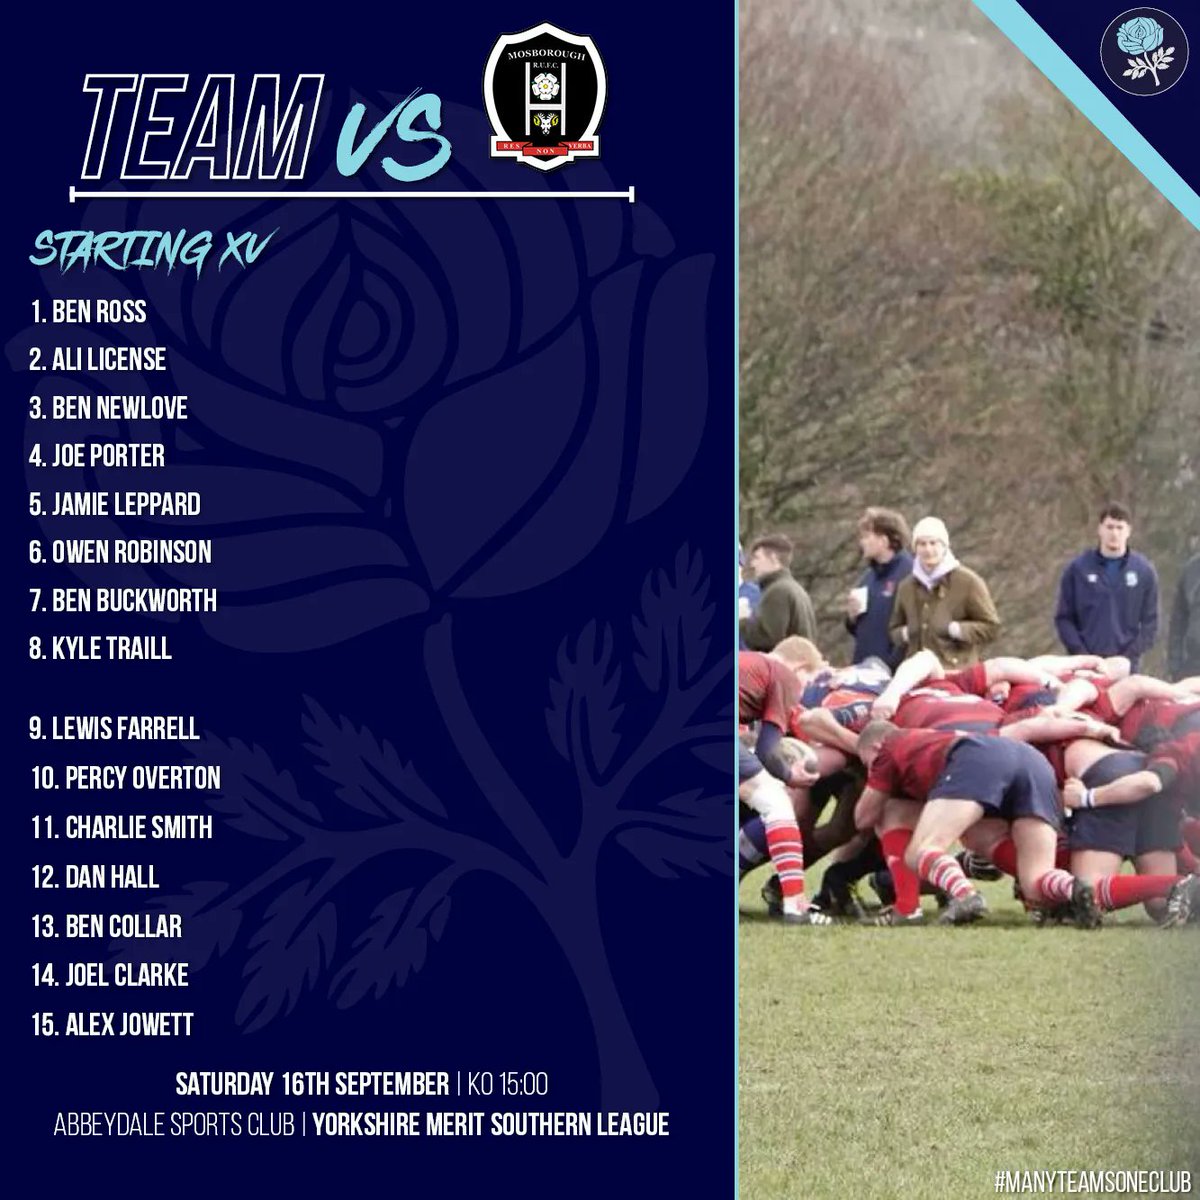 📣 Sheffield RUFC Squad Announcements 🏉

1st XV 🆚 @RugbyHoppers
2nd XV 🆚 @ScunthorpeRUFC
3rd XV 🆚 @MosboroughRUFC

Full fixture details are available on our website ▶️
buff.ly/3PEeIMb 

#ourcityourclub #manyteamsoneclub #rugby #rugbyunion #UTH #nat2n @natleague_rugby